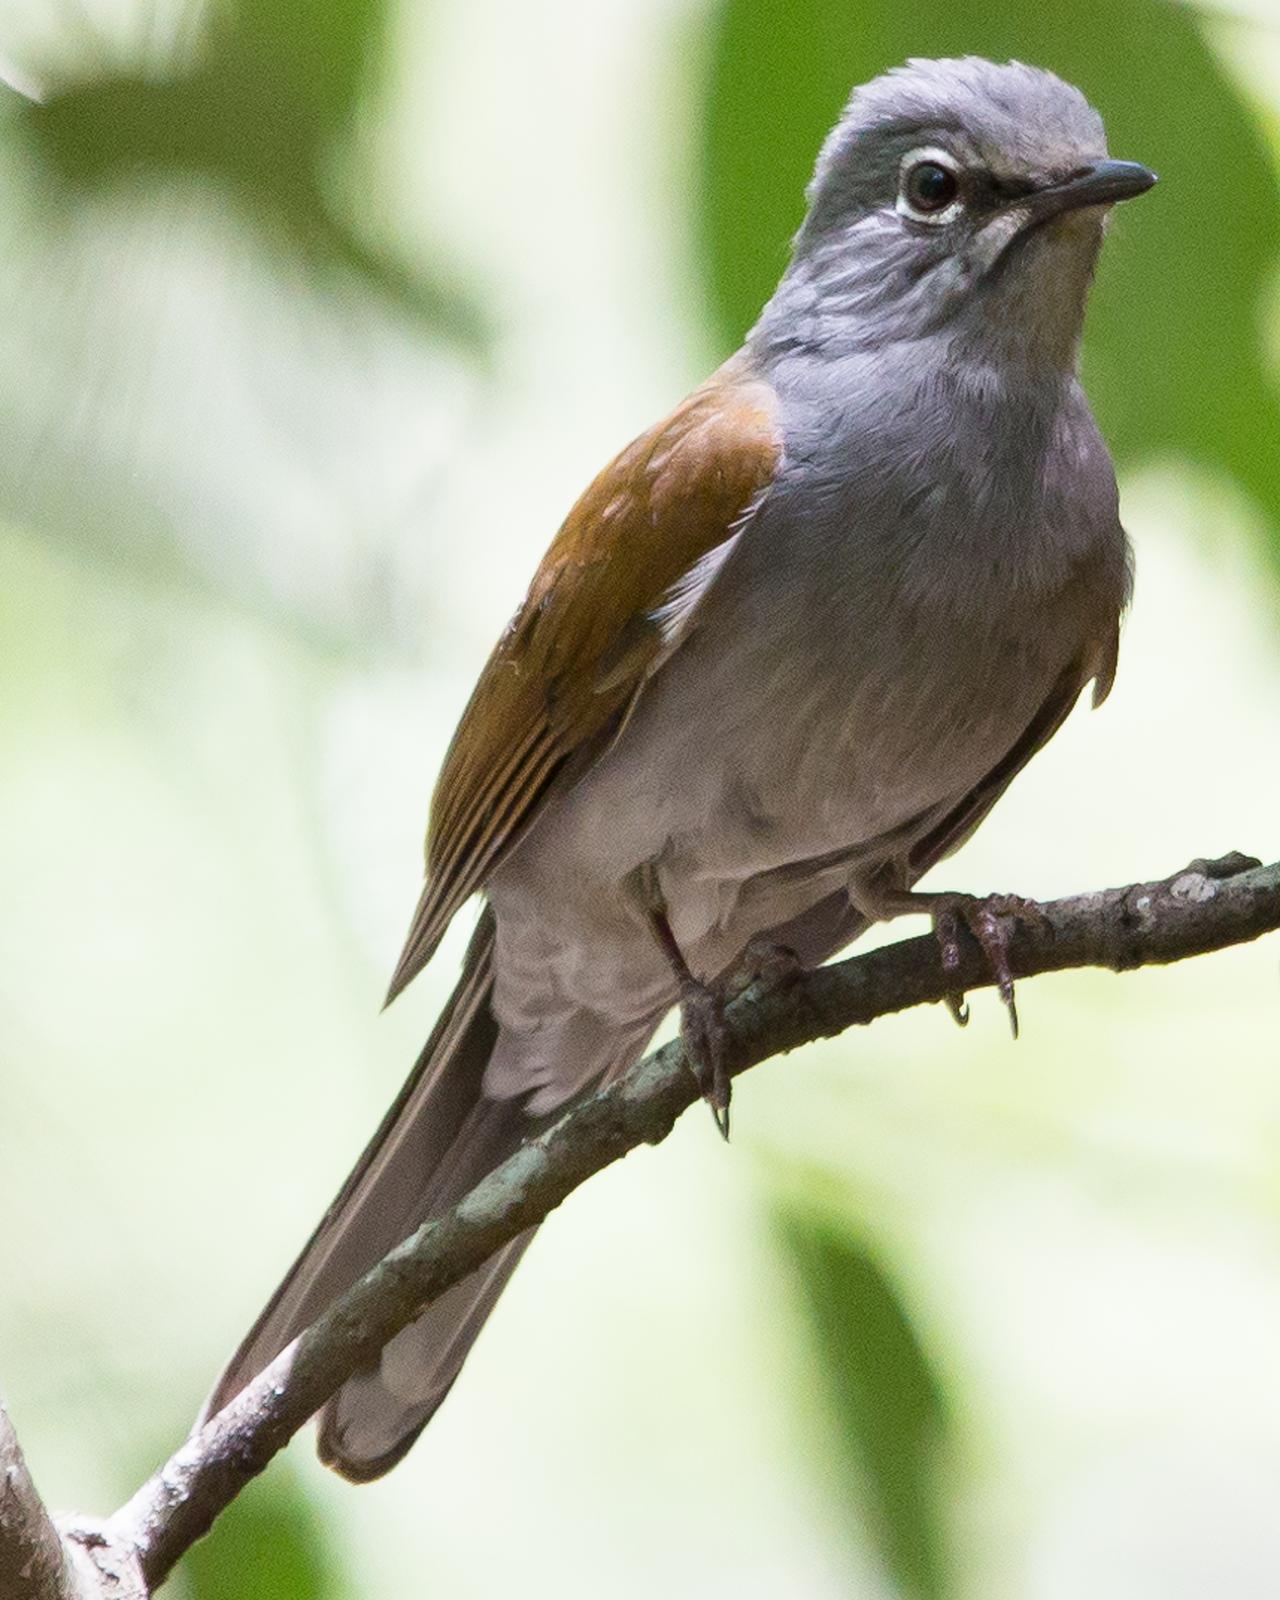 Brown-backed Solitaire Photo by Edgar Miceli